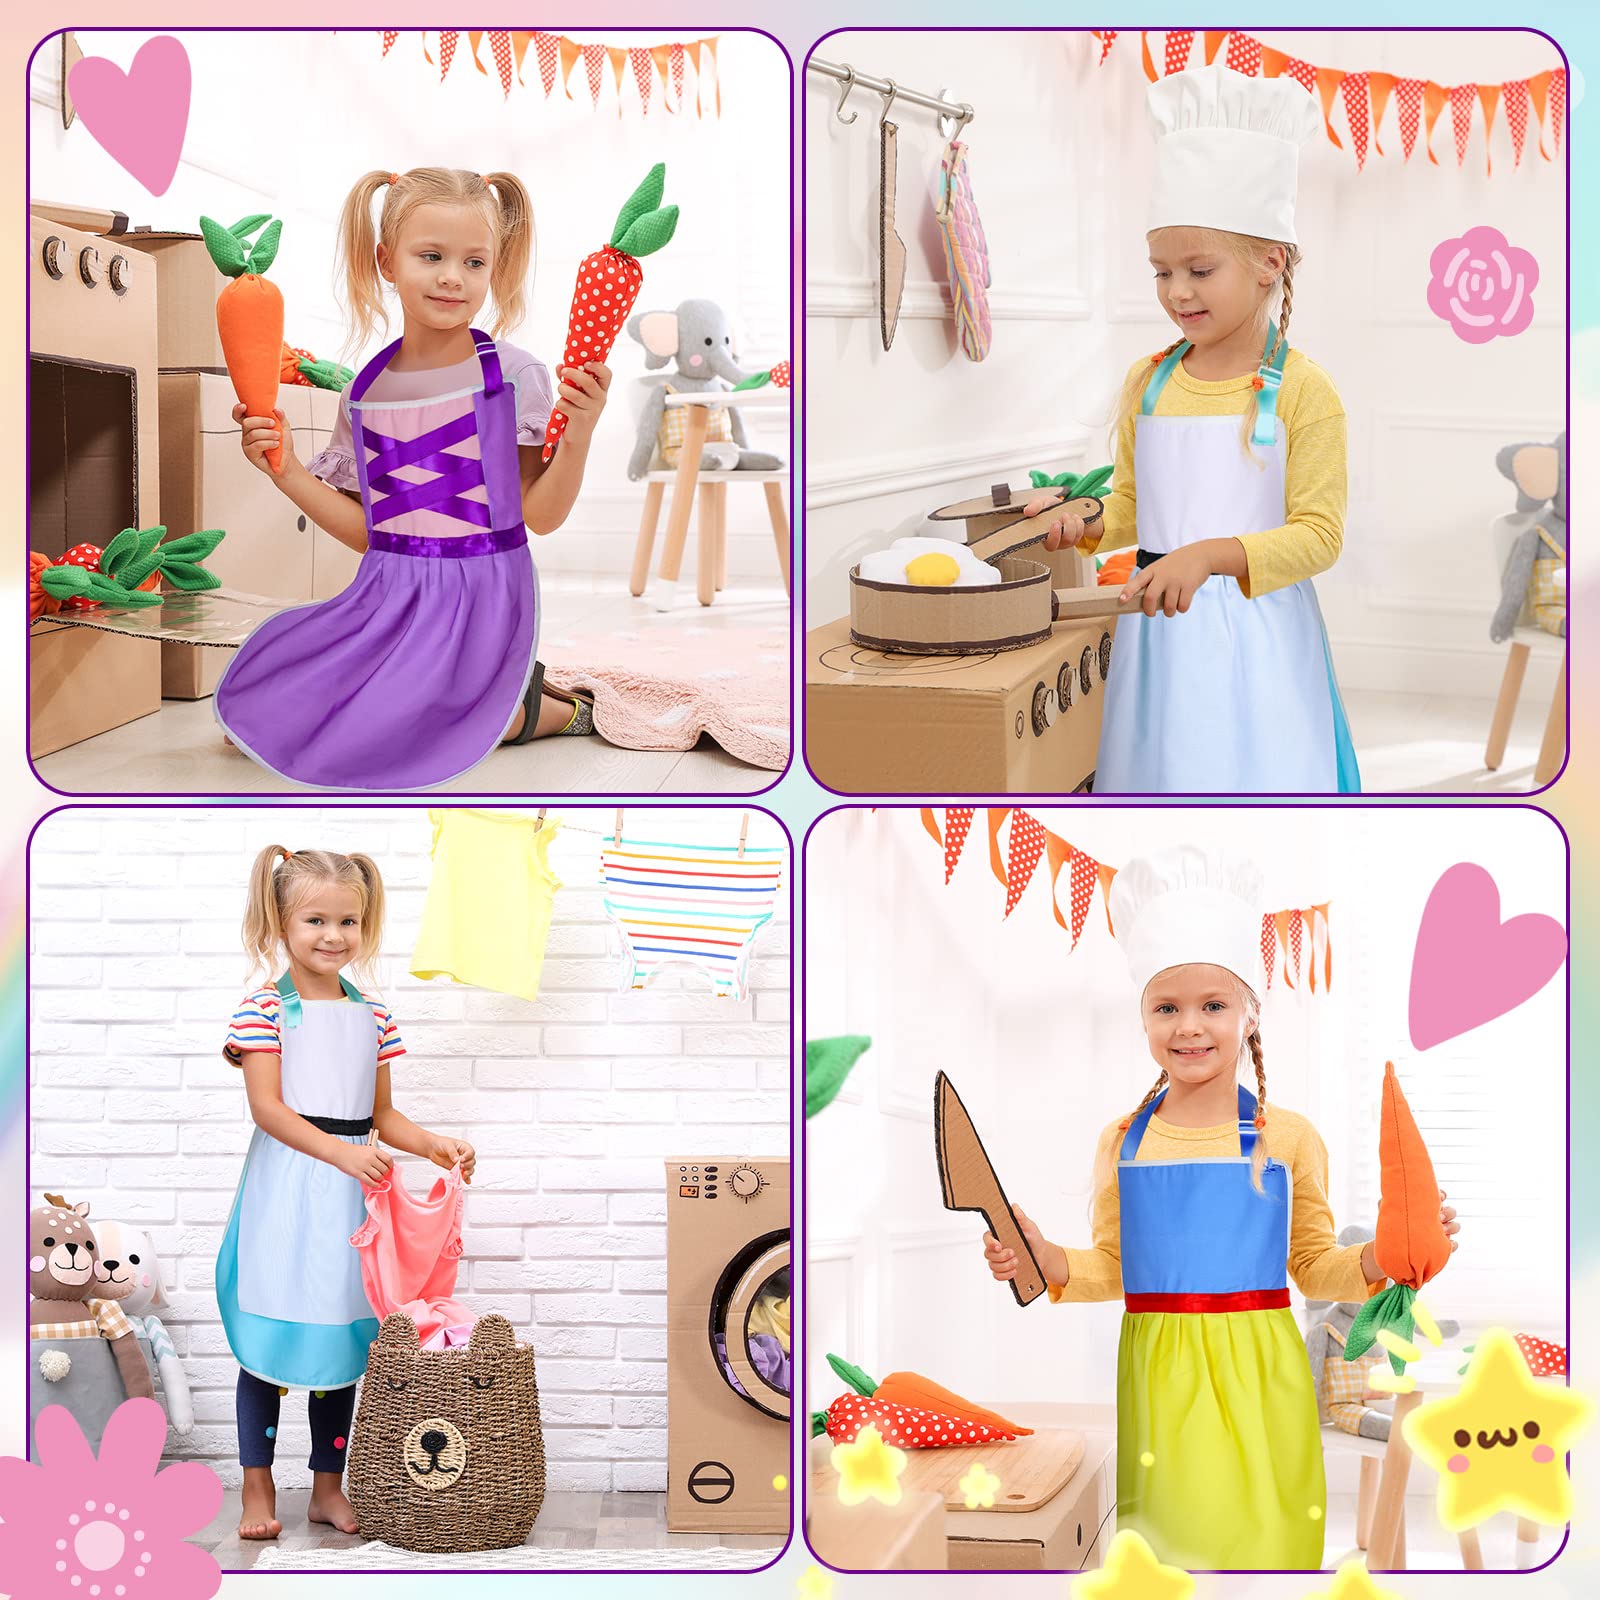 3 Pieces Child Apron for Girls Kid Toddler Aprons Princess Kitchen Chef Apron Art Smock Adjustable Cute Apron for Artist Painting Cooking Baking Gardening Kitchen Supplies, Yellow Purple White Blue